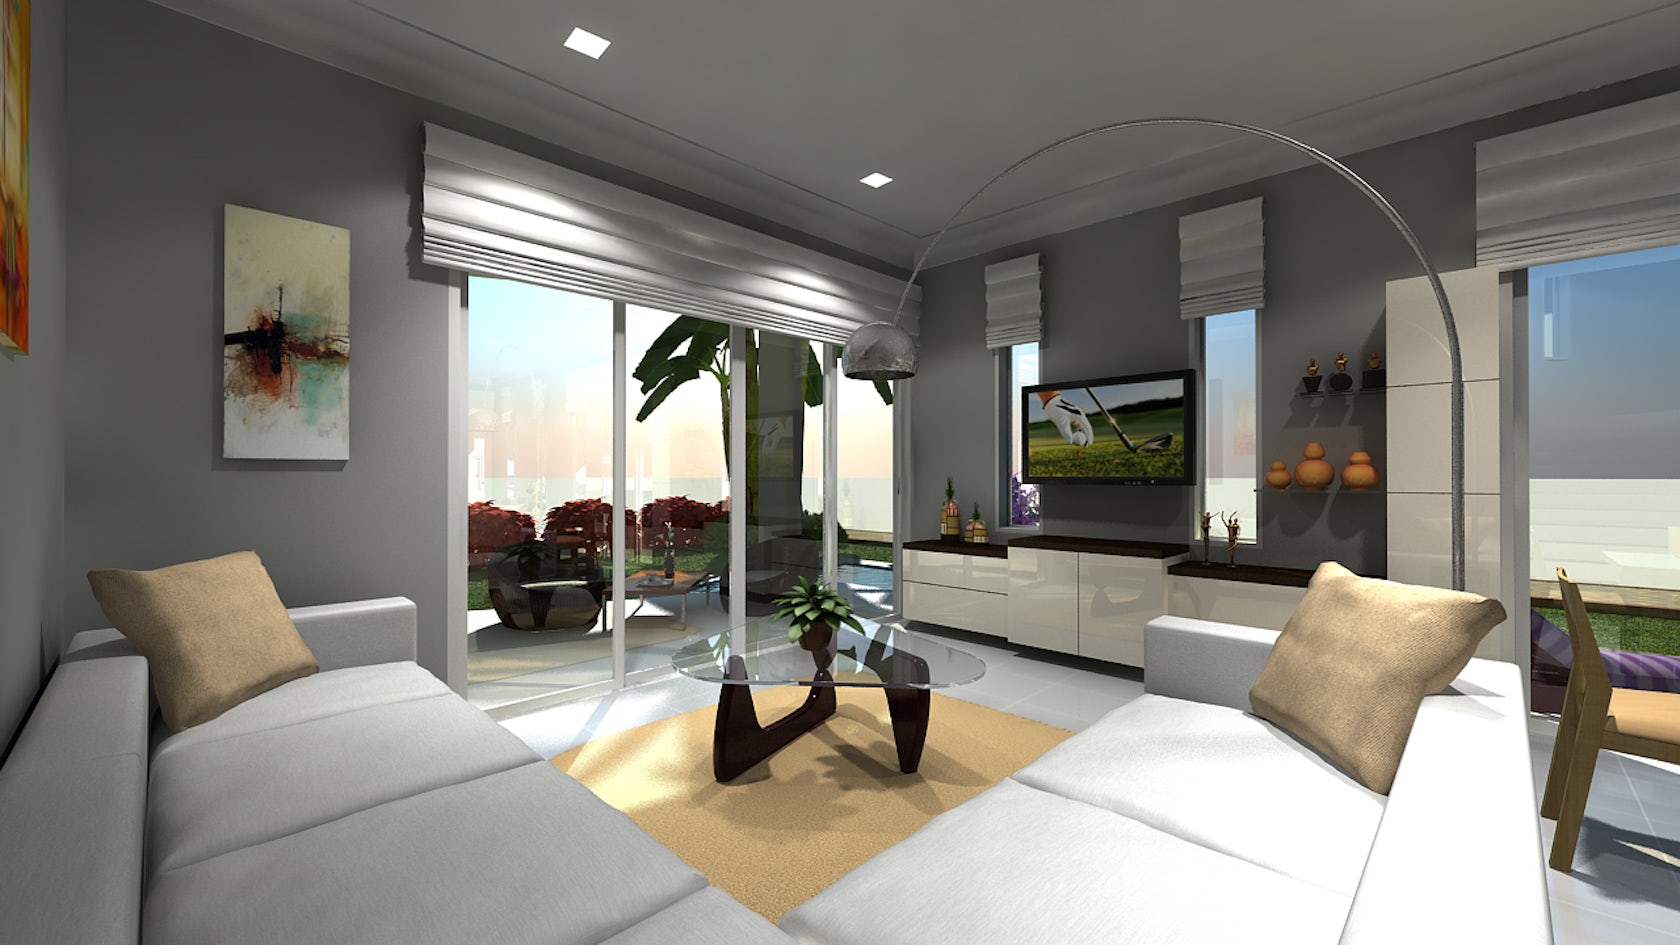 Interior Architectural 3D Modeling Samples of Hotel Building by Hitech